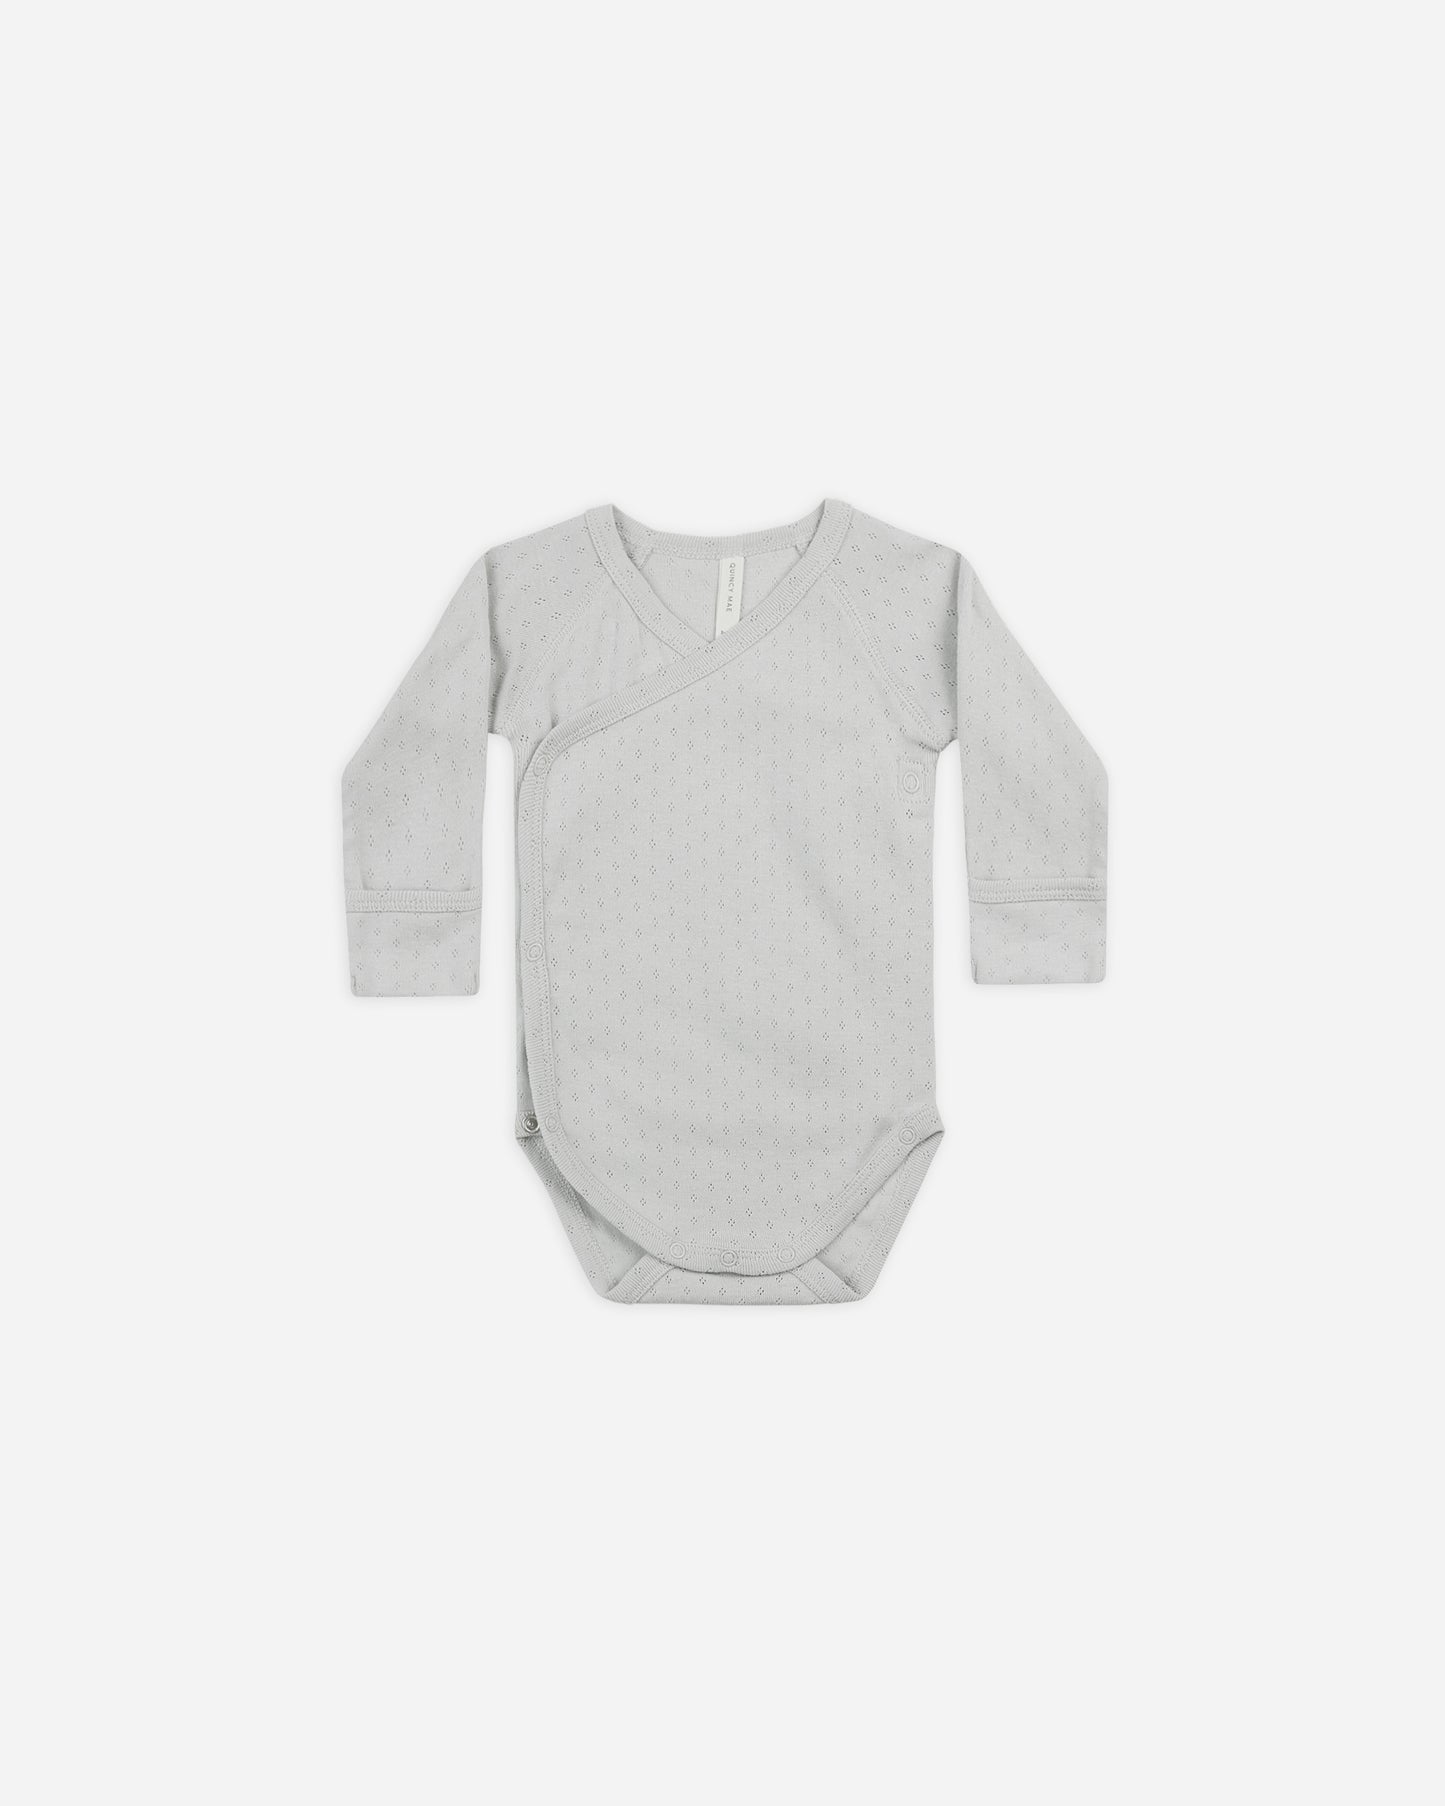 Pointelle Side Snap Bodysuit || Cloud - Rylee + Cru | Kids Clothes | Trendy Baby Clothes | Modern Infant Outfits |